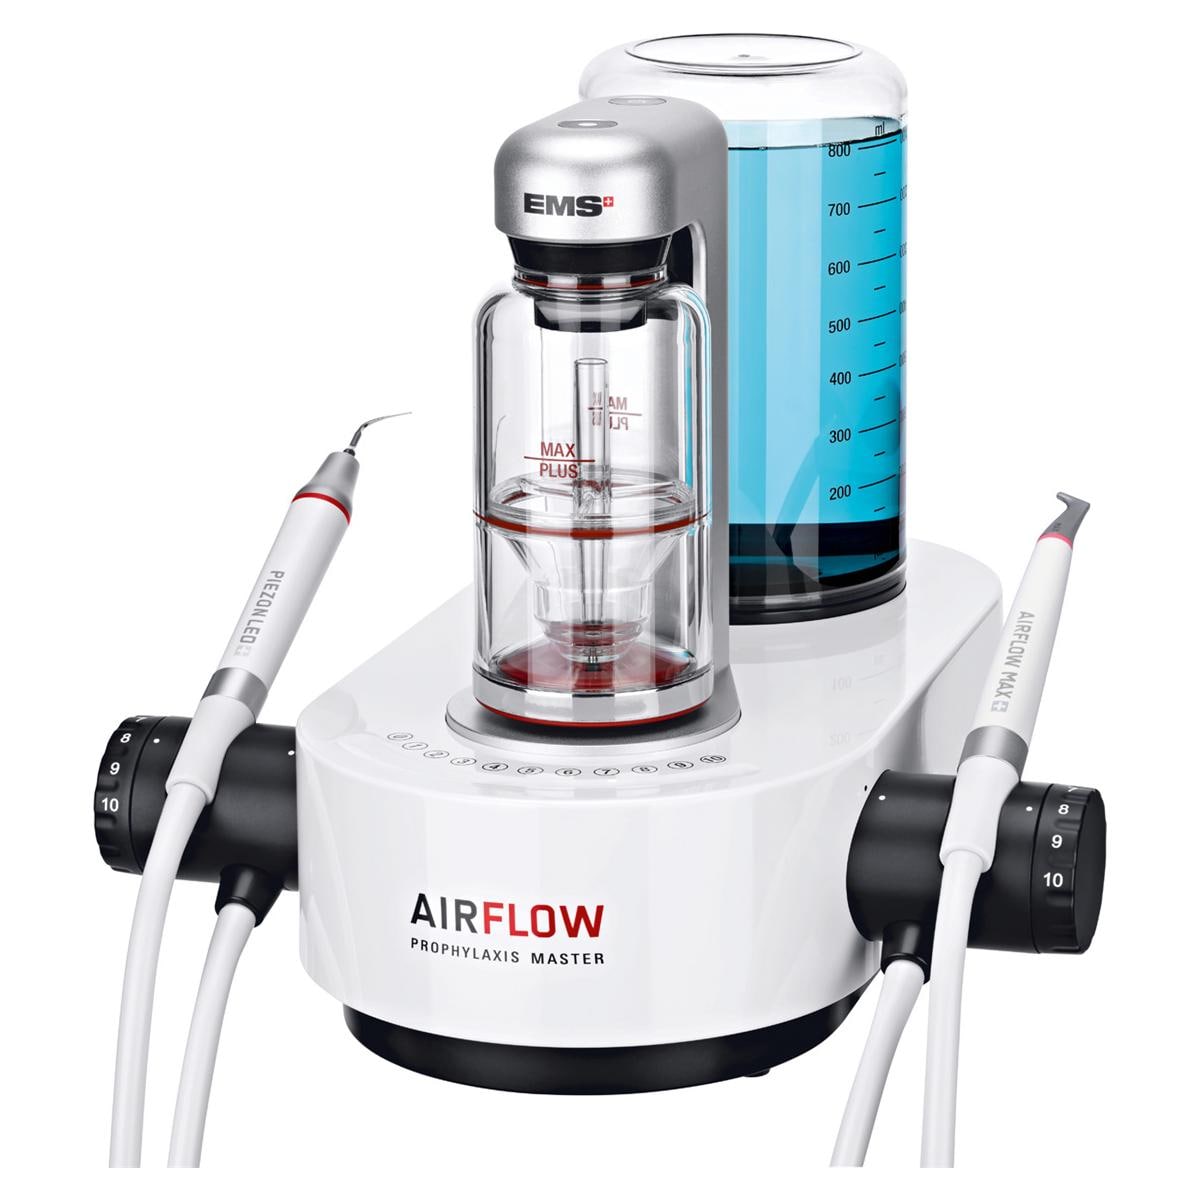 AIRFLOW Prophylaxis Master - FT-229